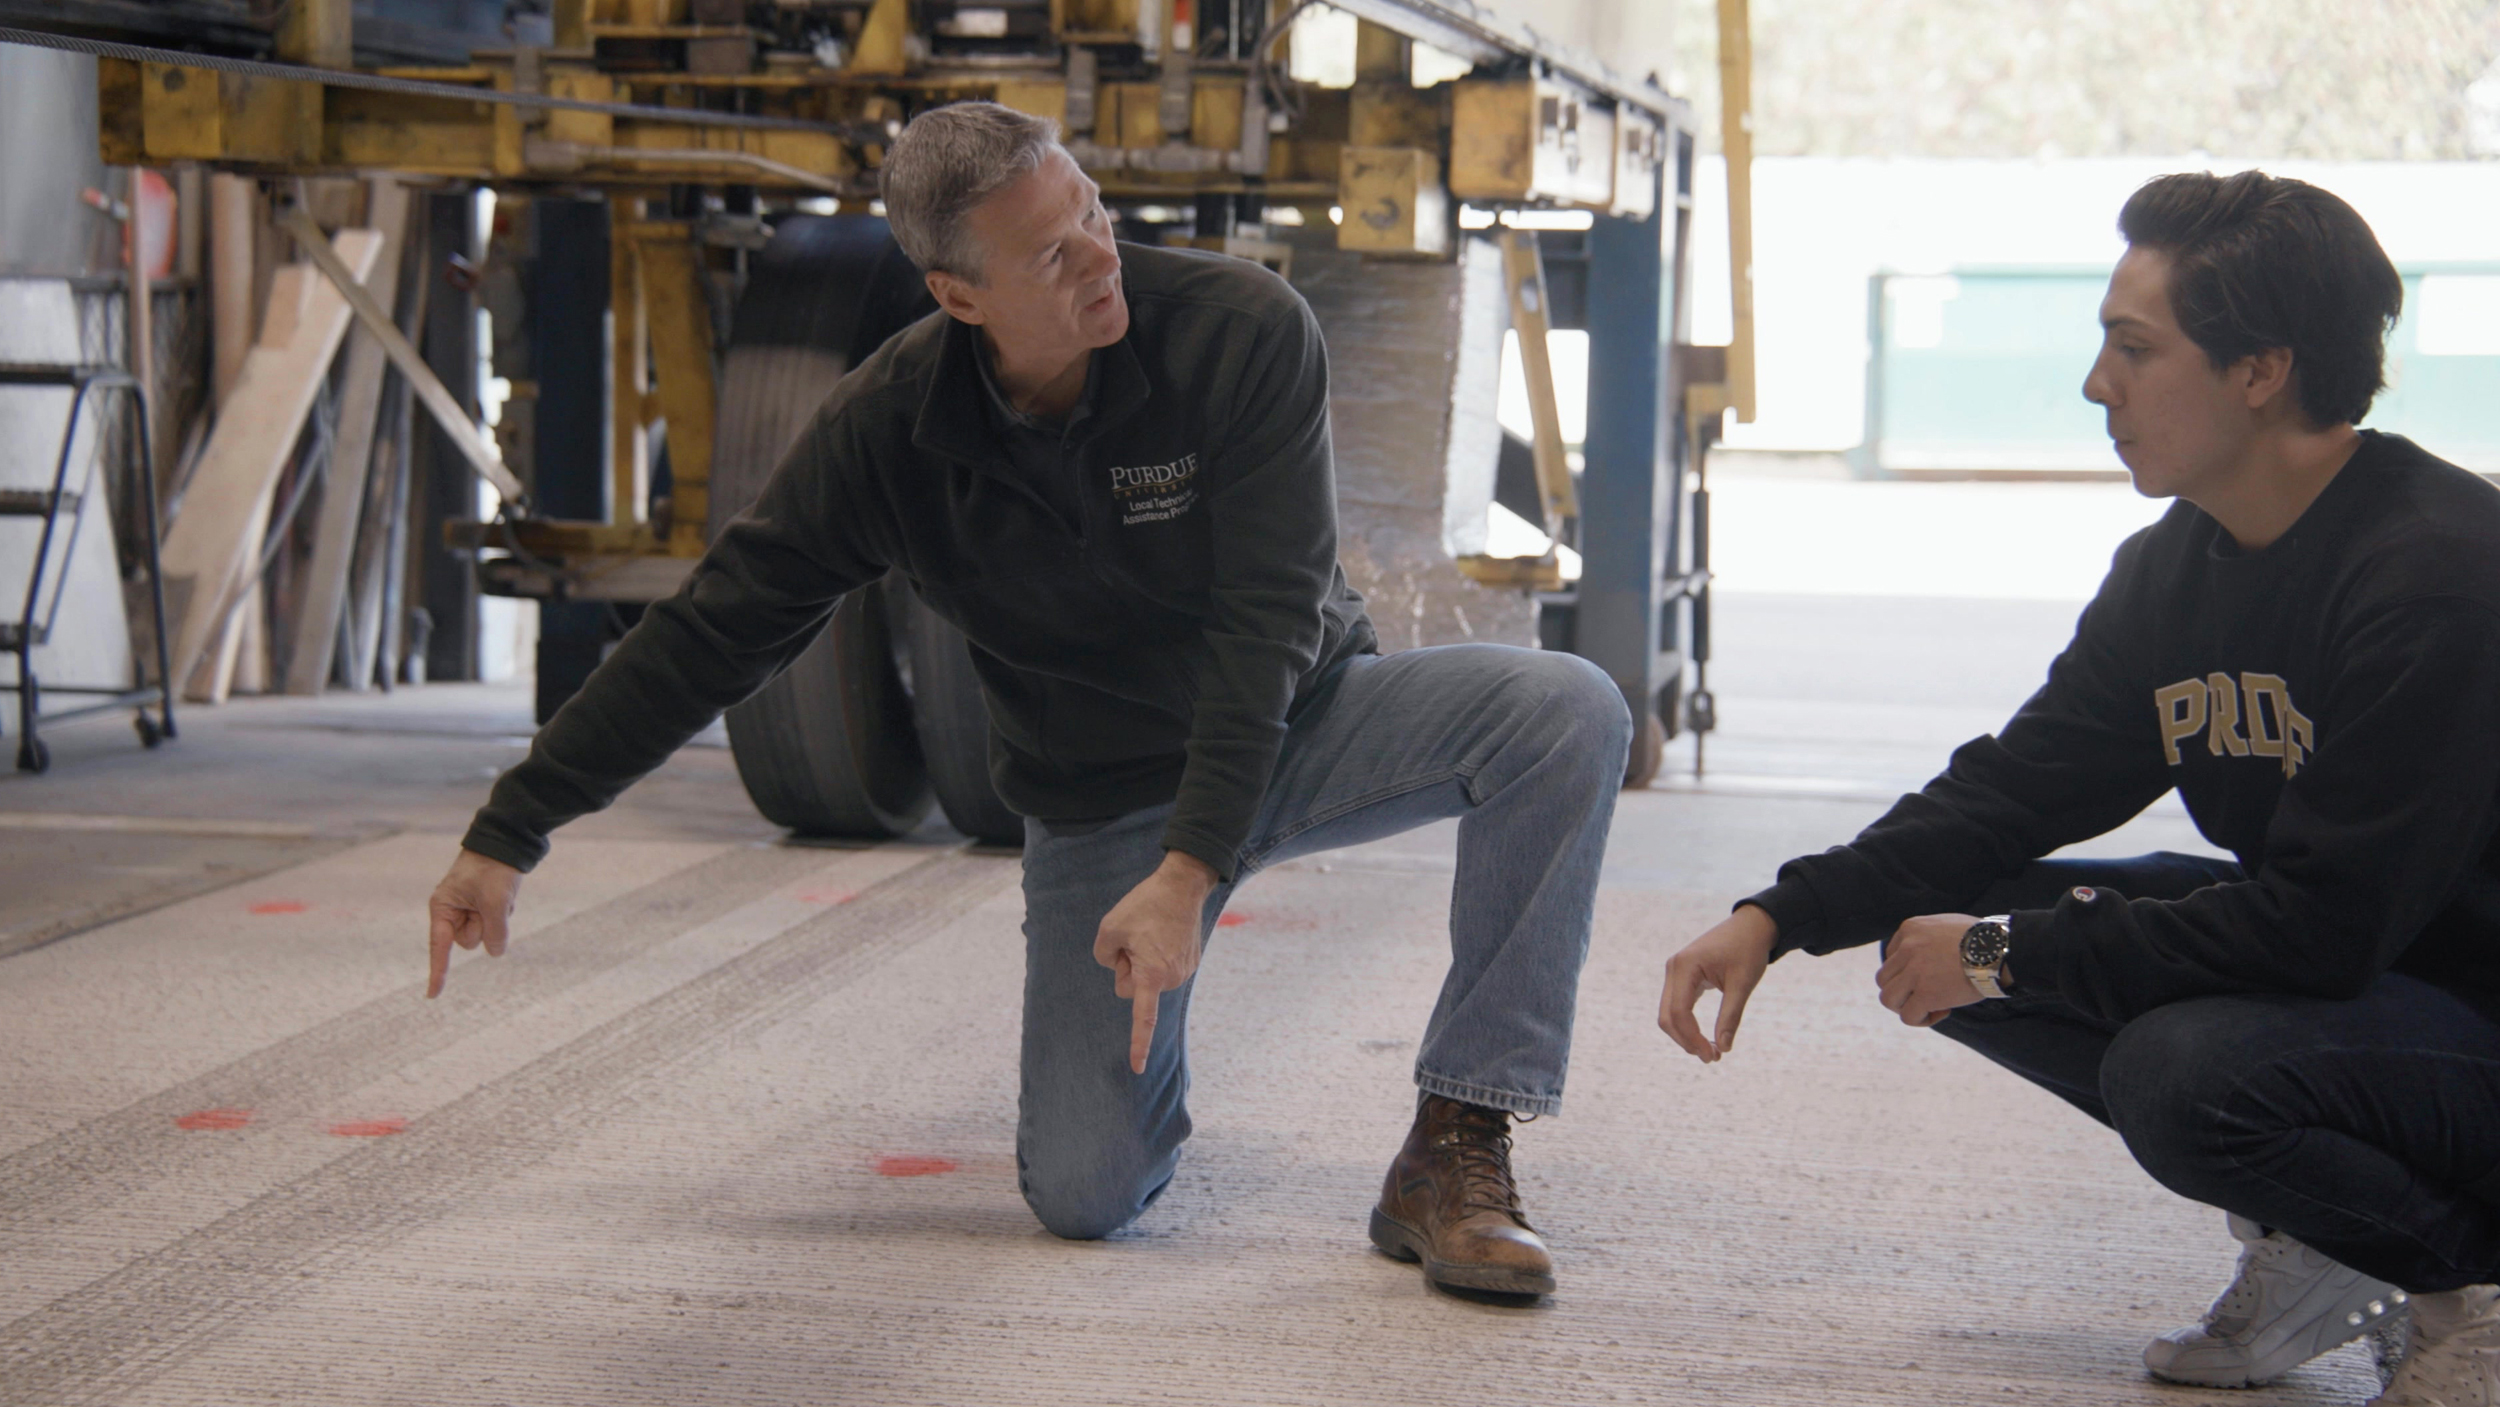 A man in jeans, a long-sleeved shirt and boots kneels on the floor and shows another man listening and kneeling next to him.